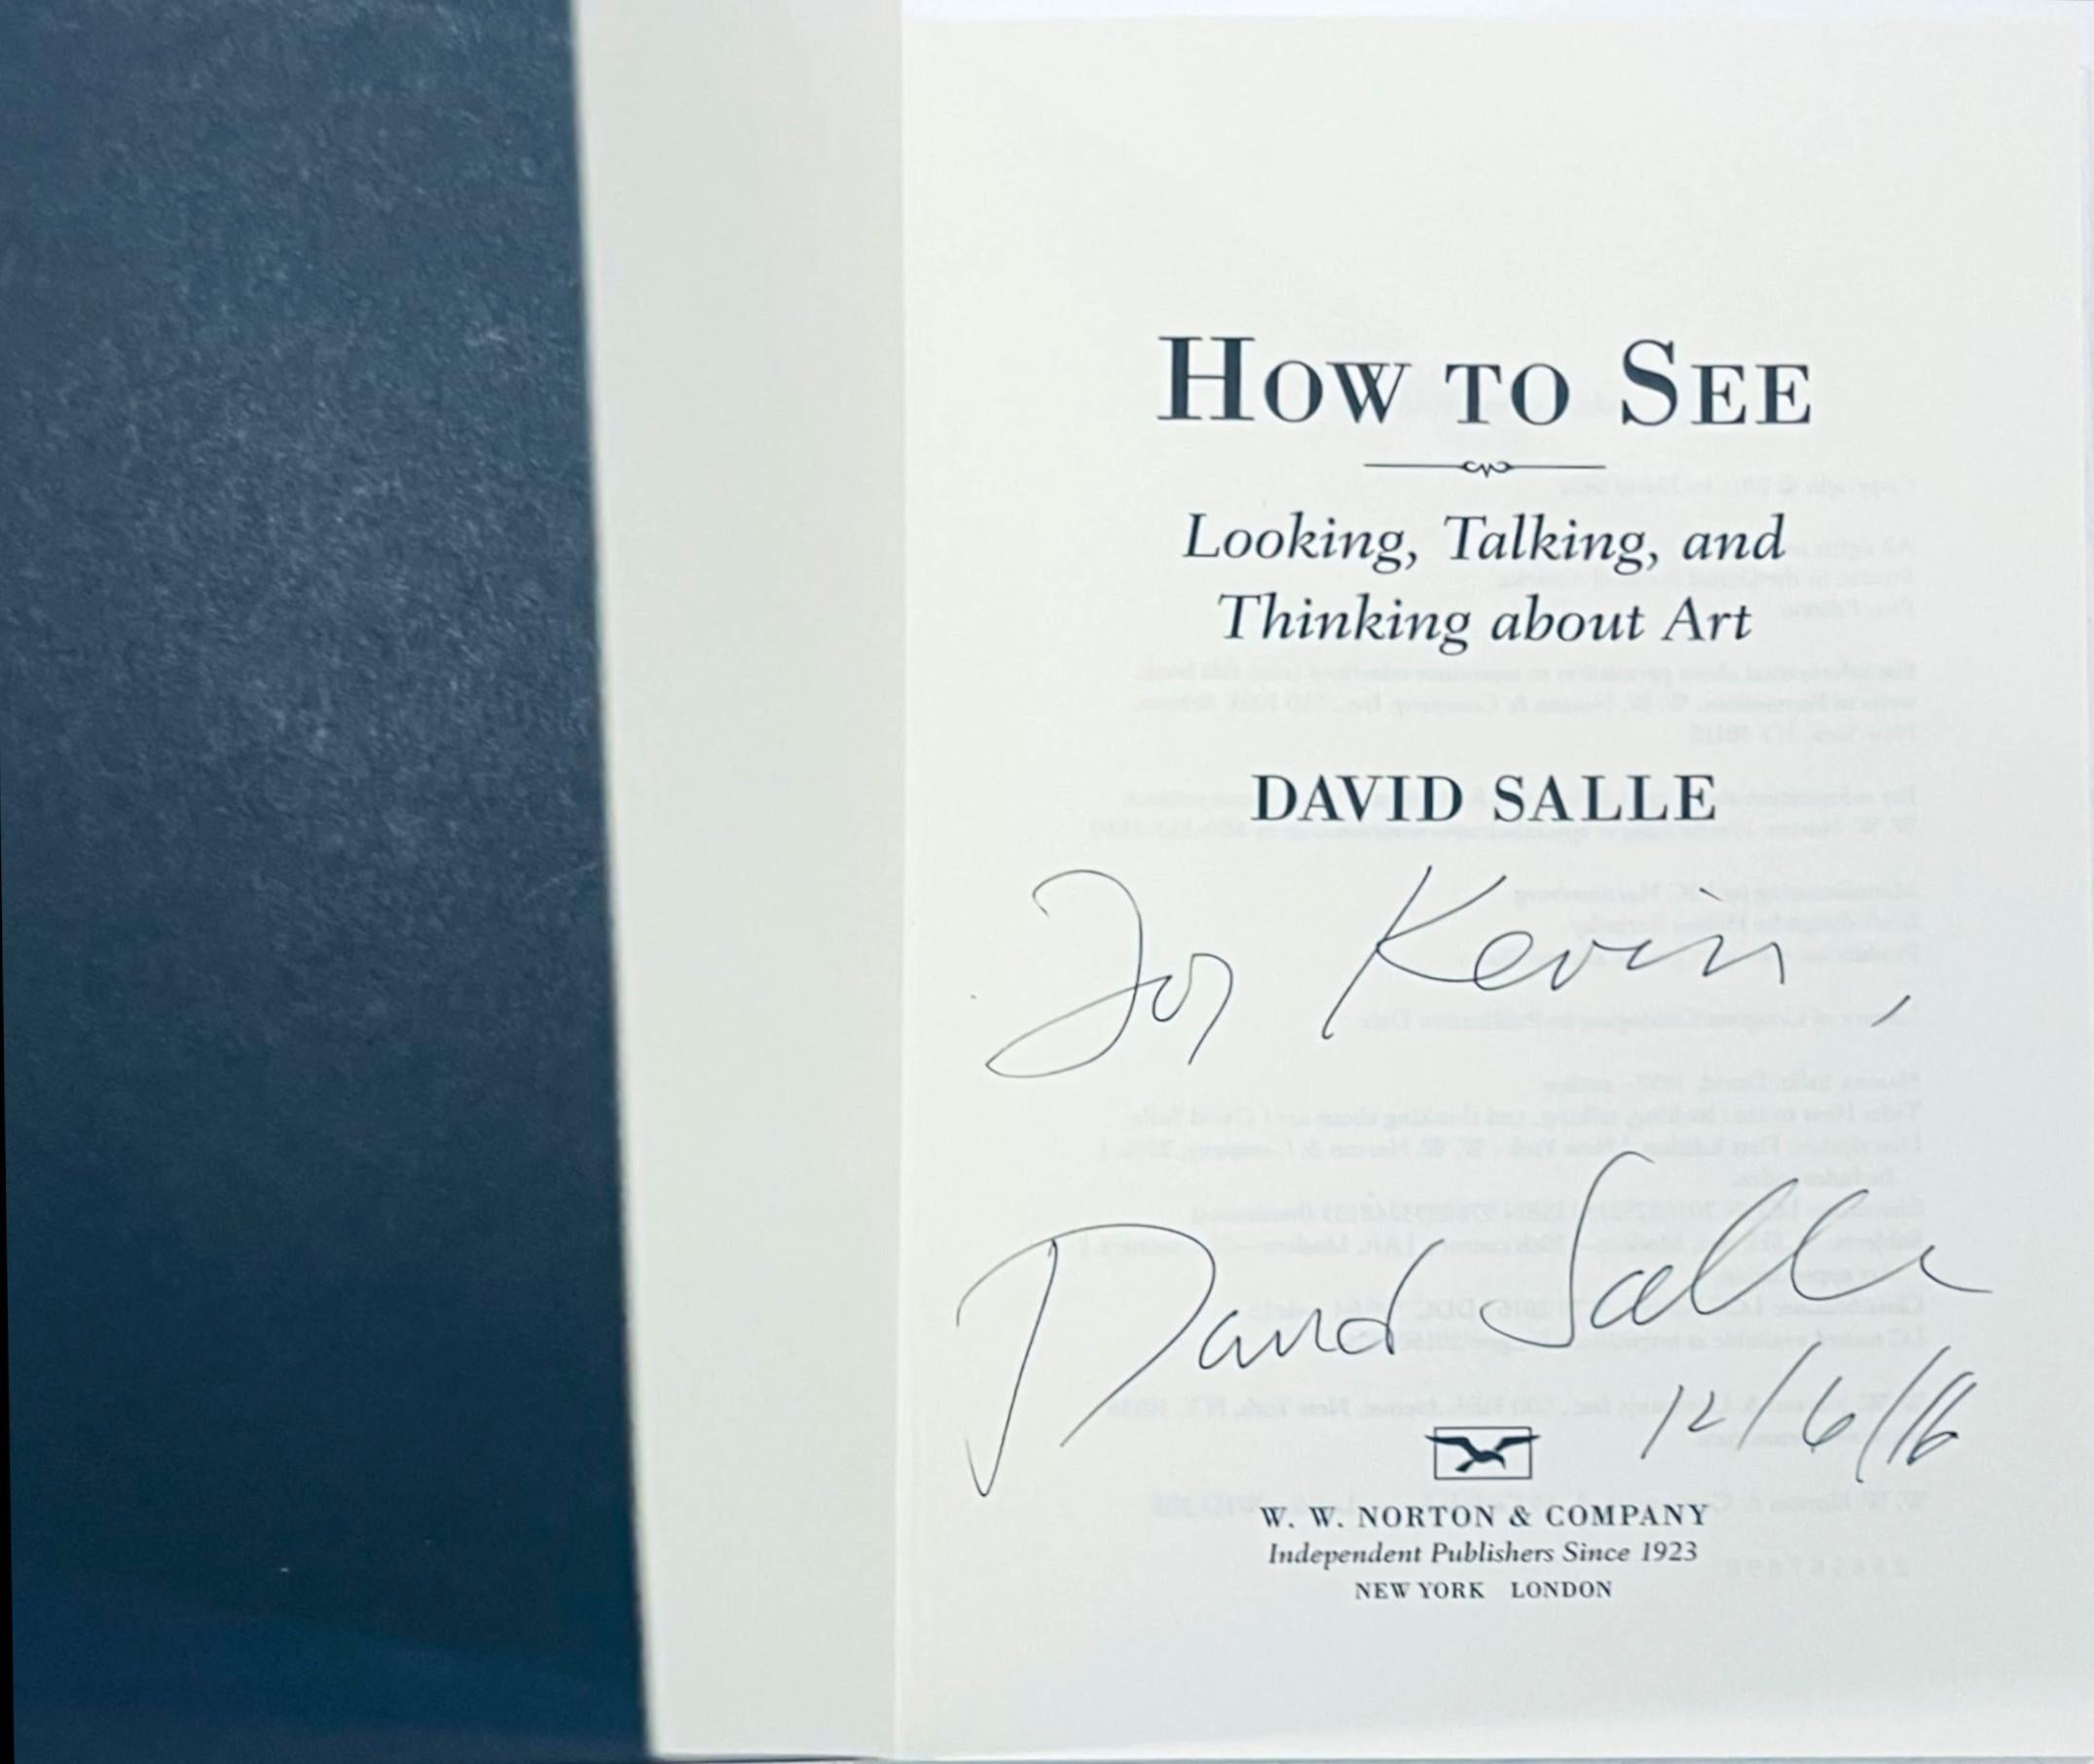 HOW TO SEE Looking, Talking and Thinking about Art (signé à la main par David Salle) en vente 1